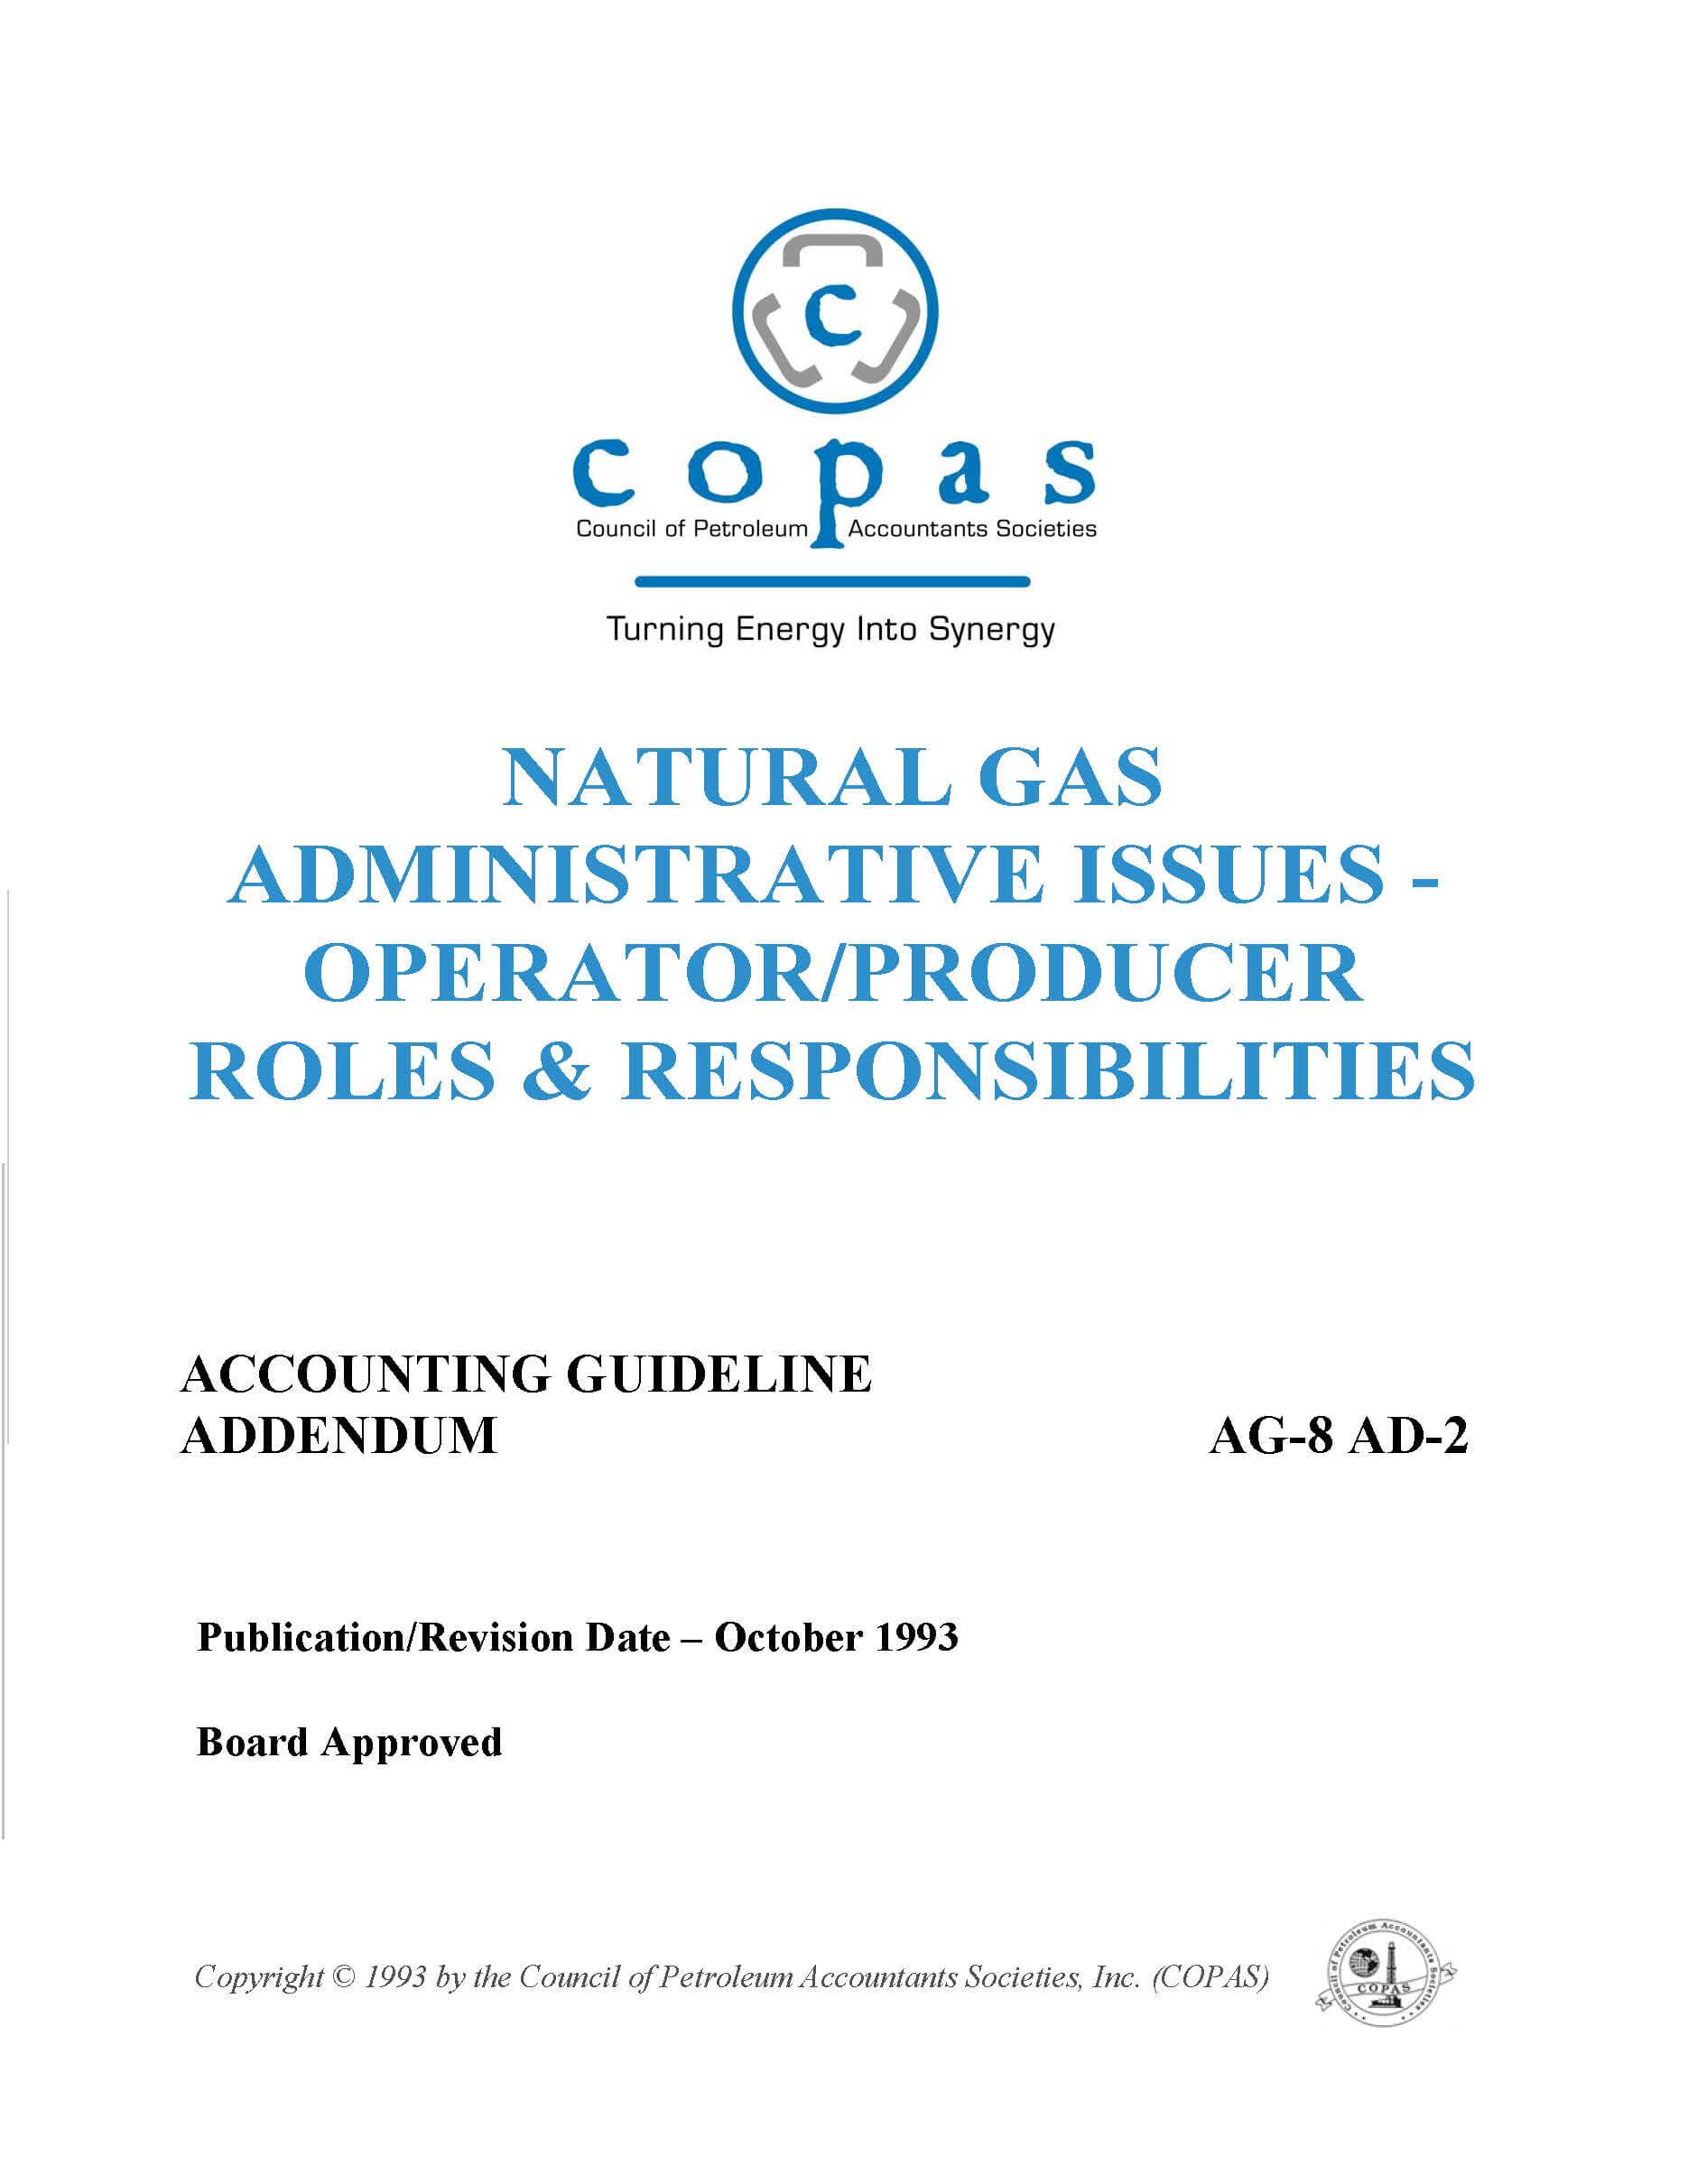 AG-8 AD-2 Natural Gas Administrative Issues – Operator / Producer Roles & Responsibilities